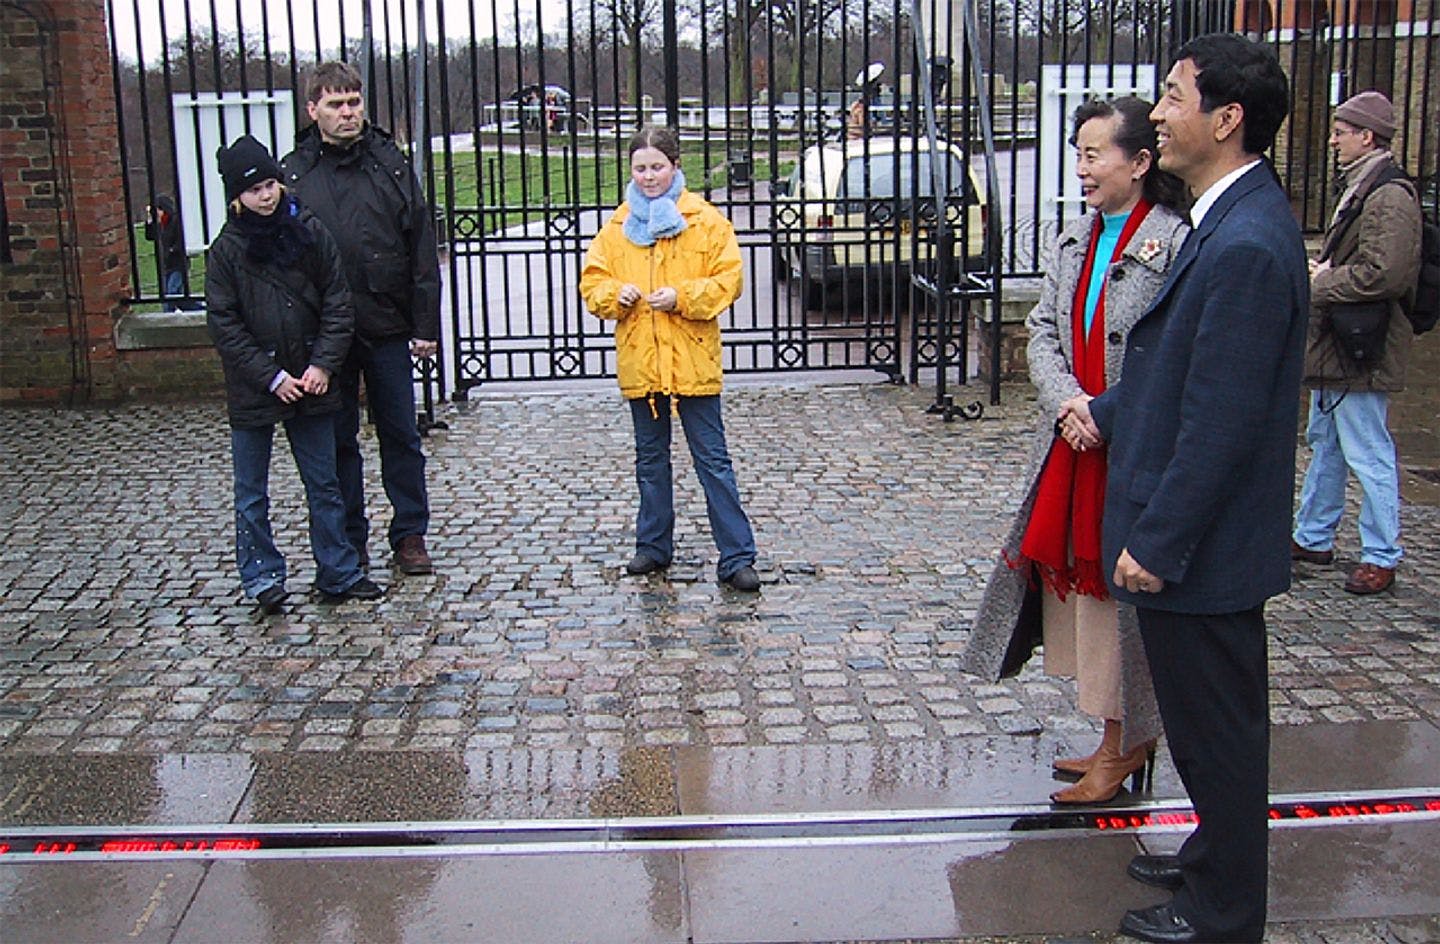 The Greenwich meridian. Photo: Ronald Toppe